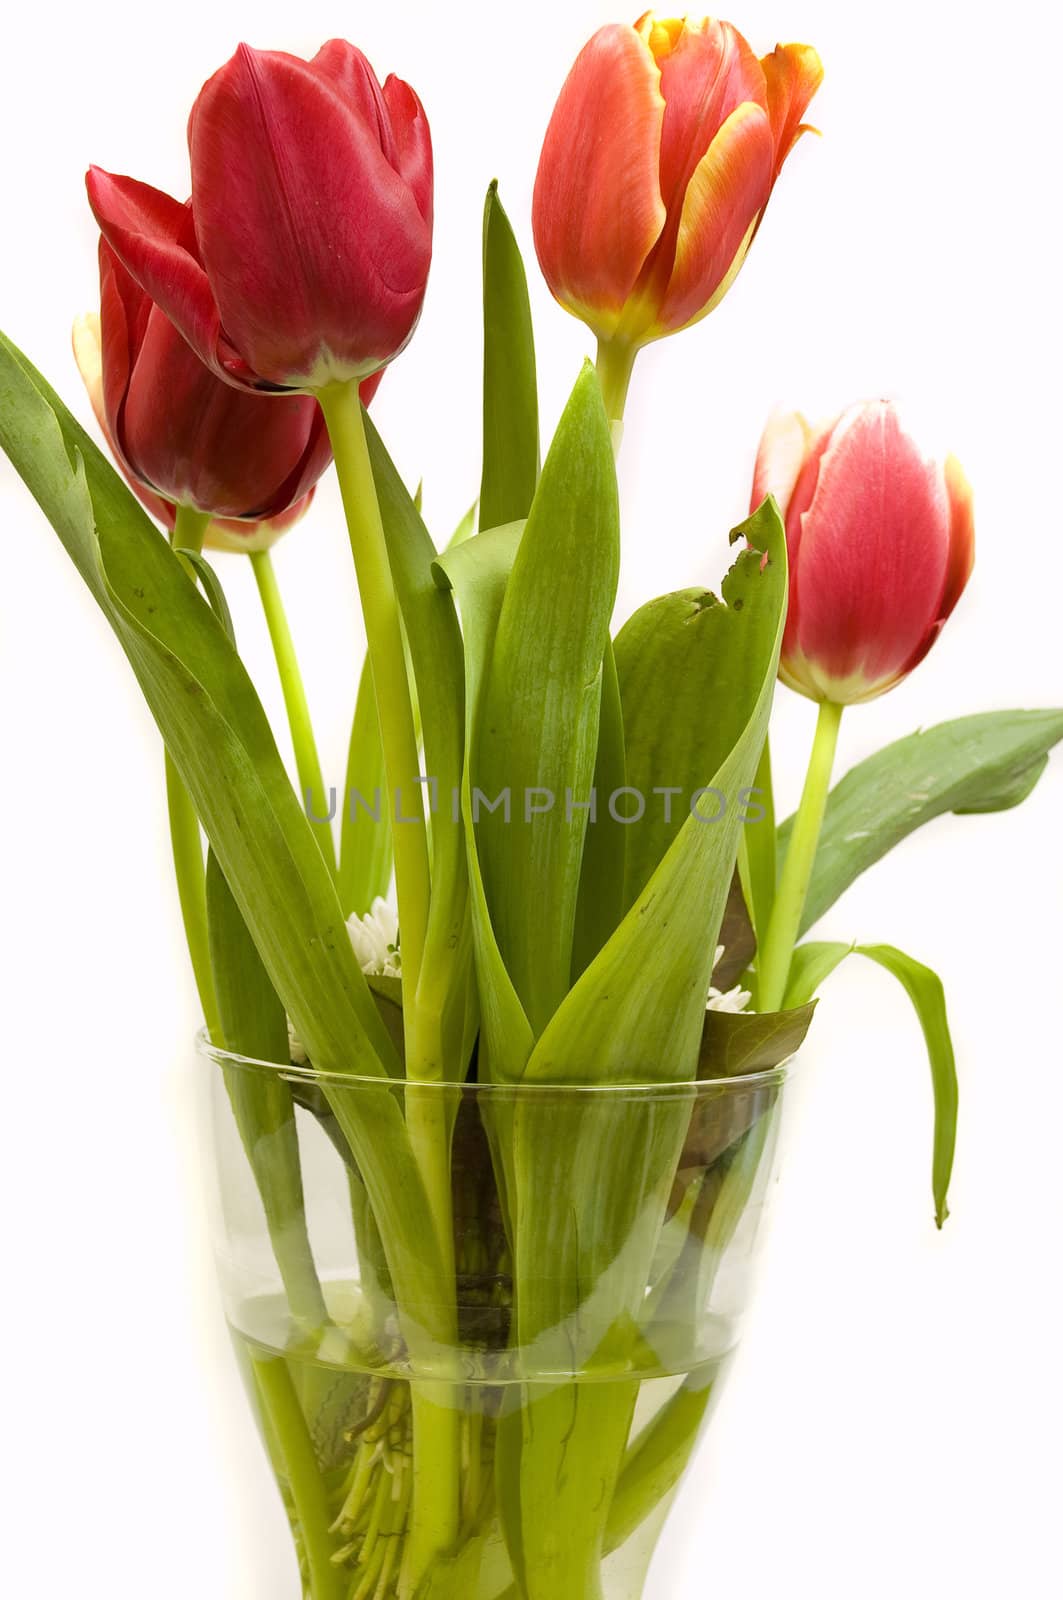 tulips bouquet by no4aphoto